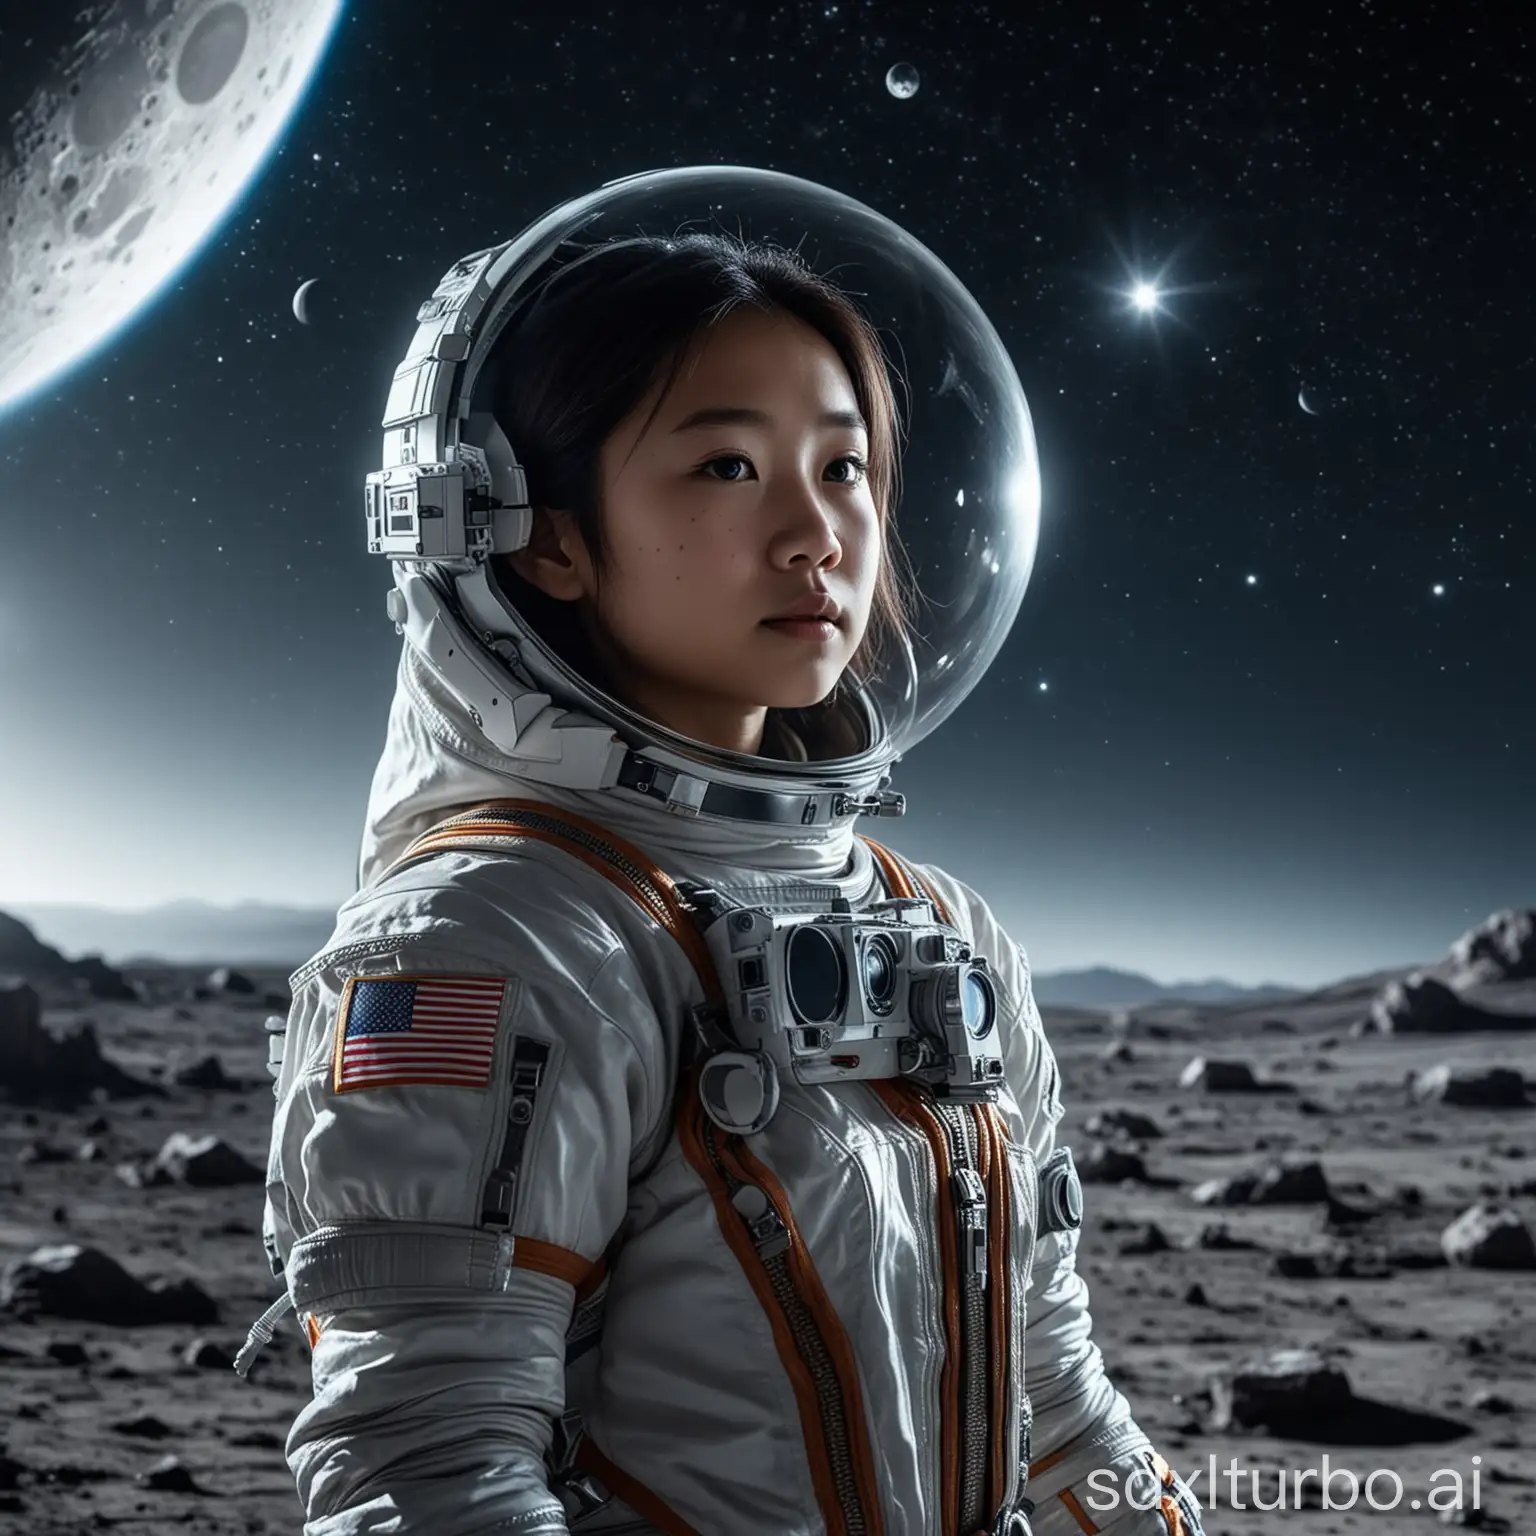 A young Asian girl stands on the moon in space, wearing a spacesuit and a transparent glass sphere on her head, with a satellite beside her, equipped with an 8k, professional-grade camera lens. There are many stars in the night sky, and the light is bright.